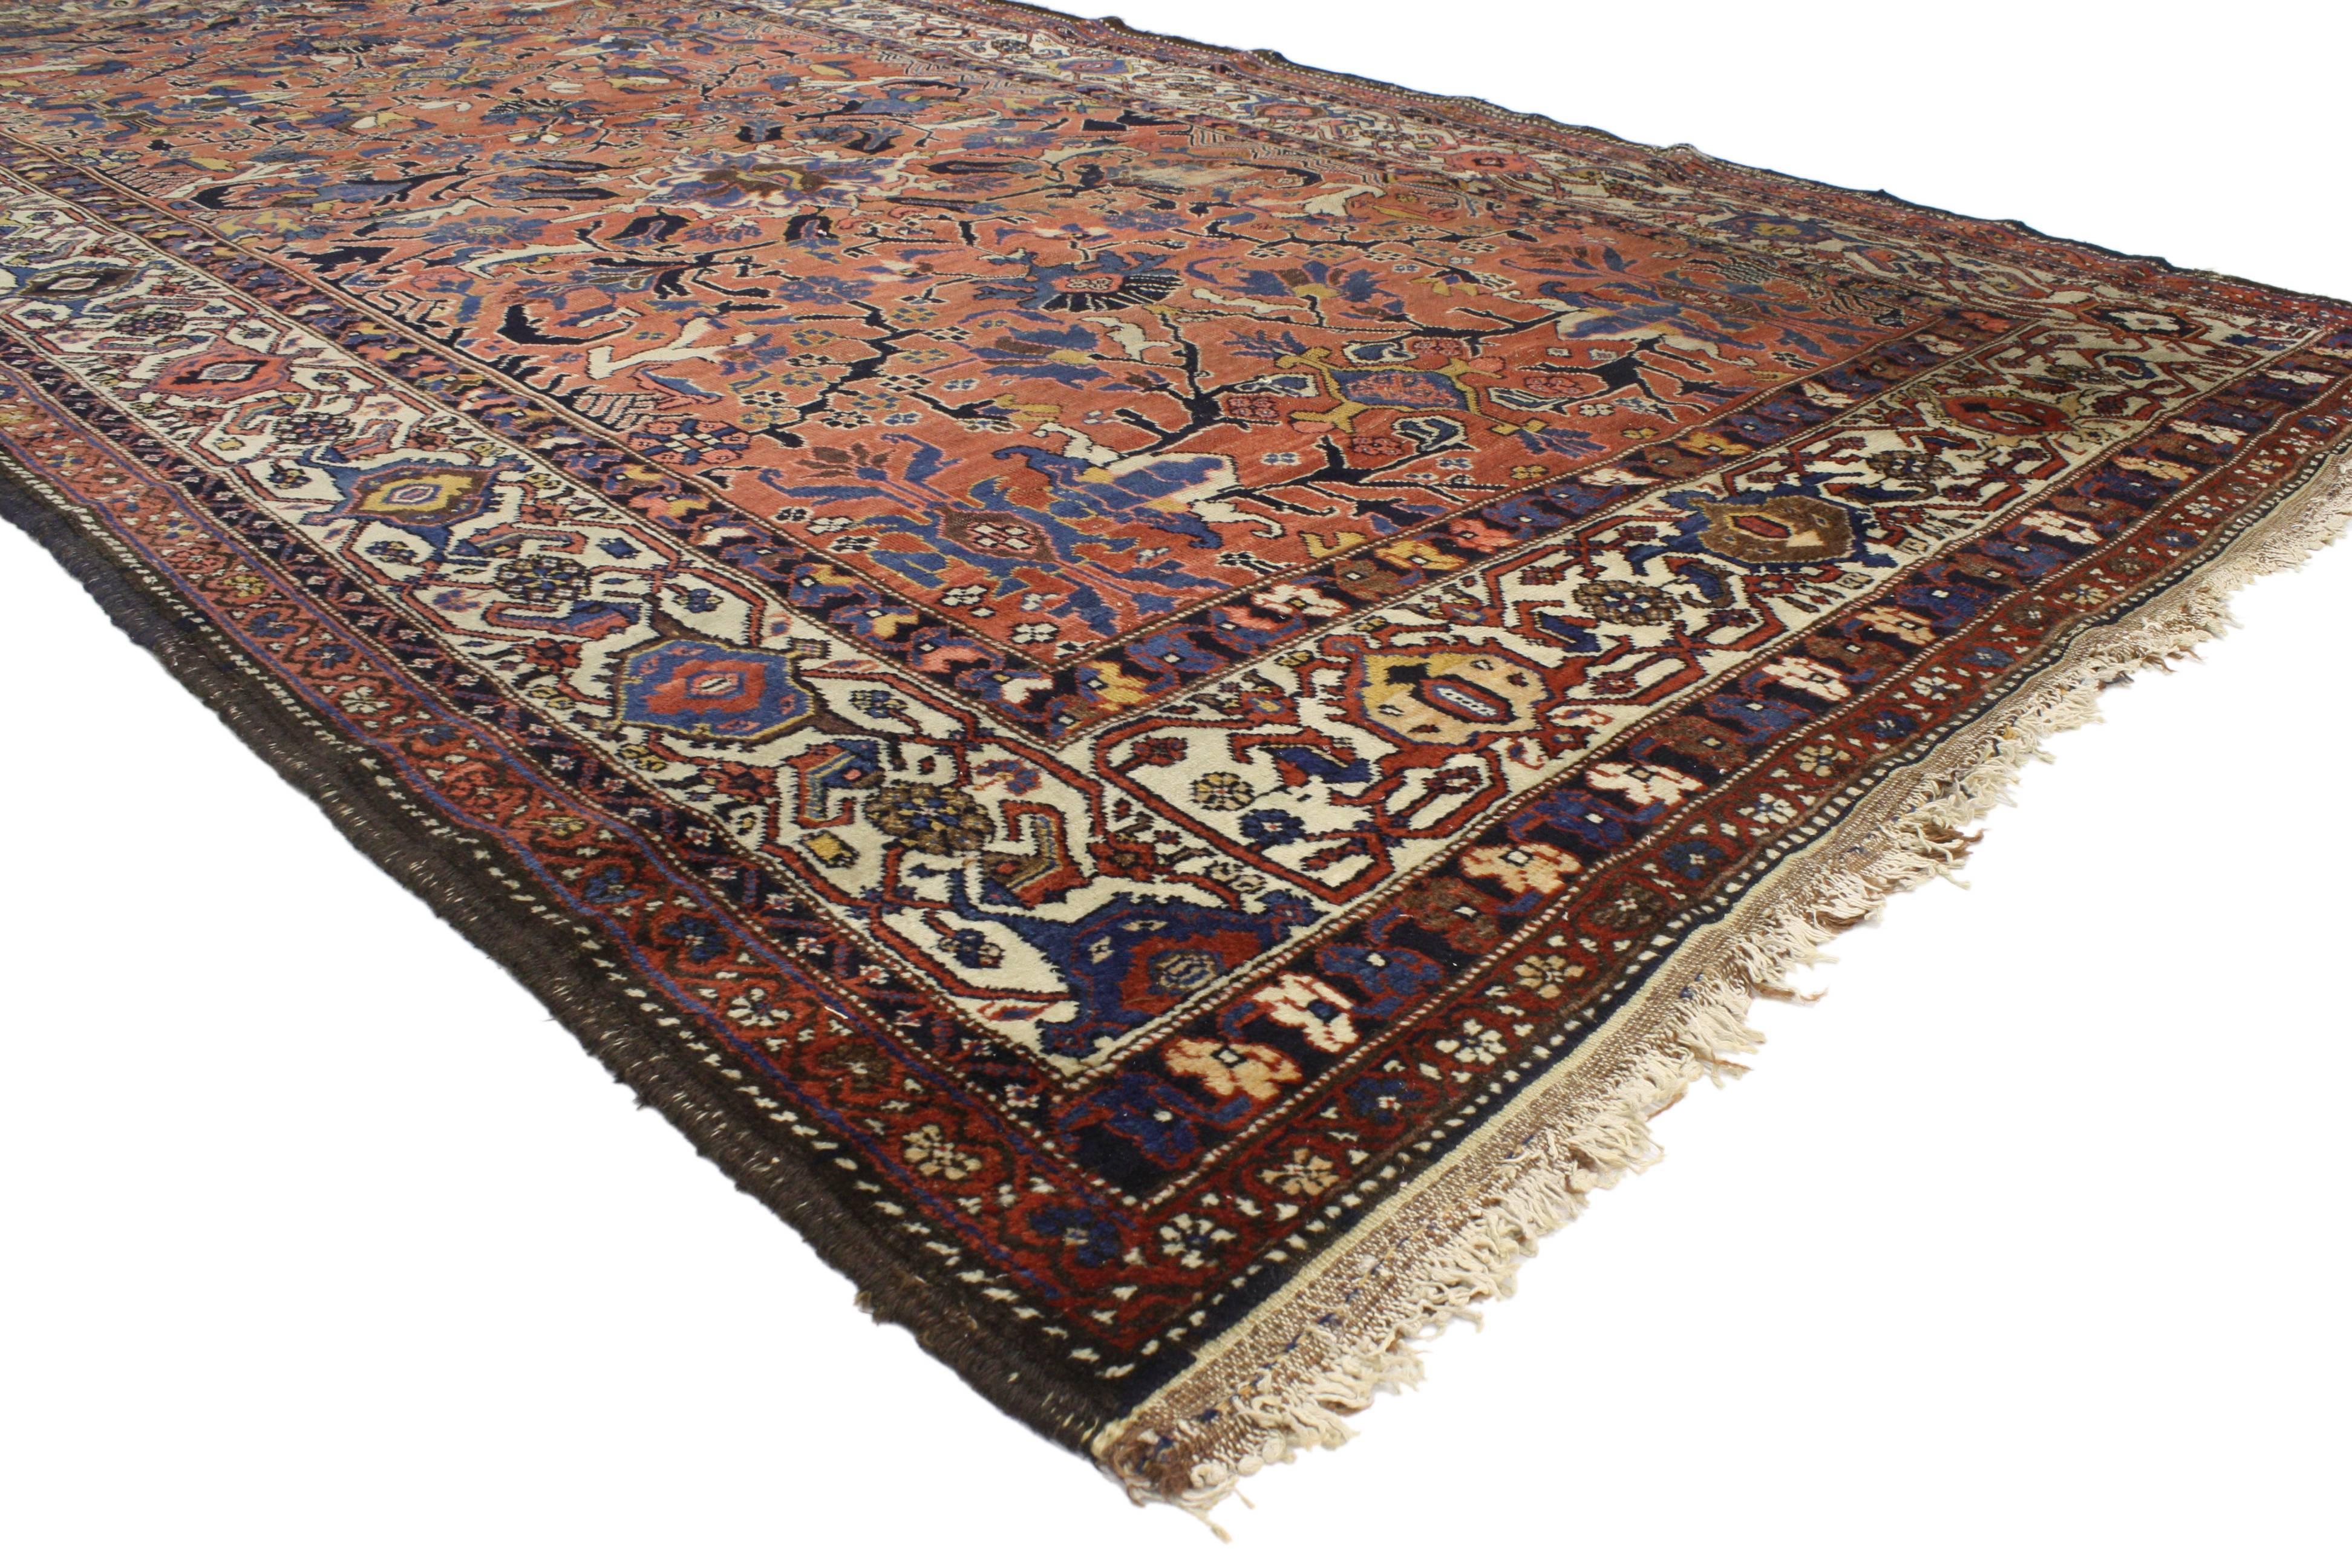 76945 Distressed Antique Persian Bijar Rug with Modern Rustic Style. Warm and inviting, this hand-knotted wool distressed antique Persian Bijar rug beautifully embodies a modern rustic style. The weathered field highlights an all-over botanical